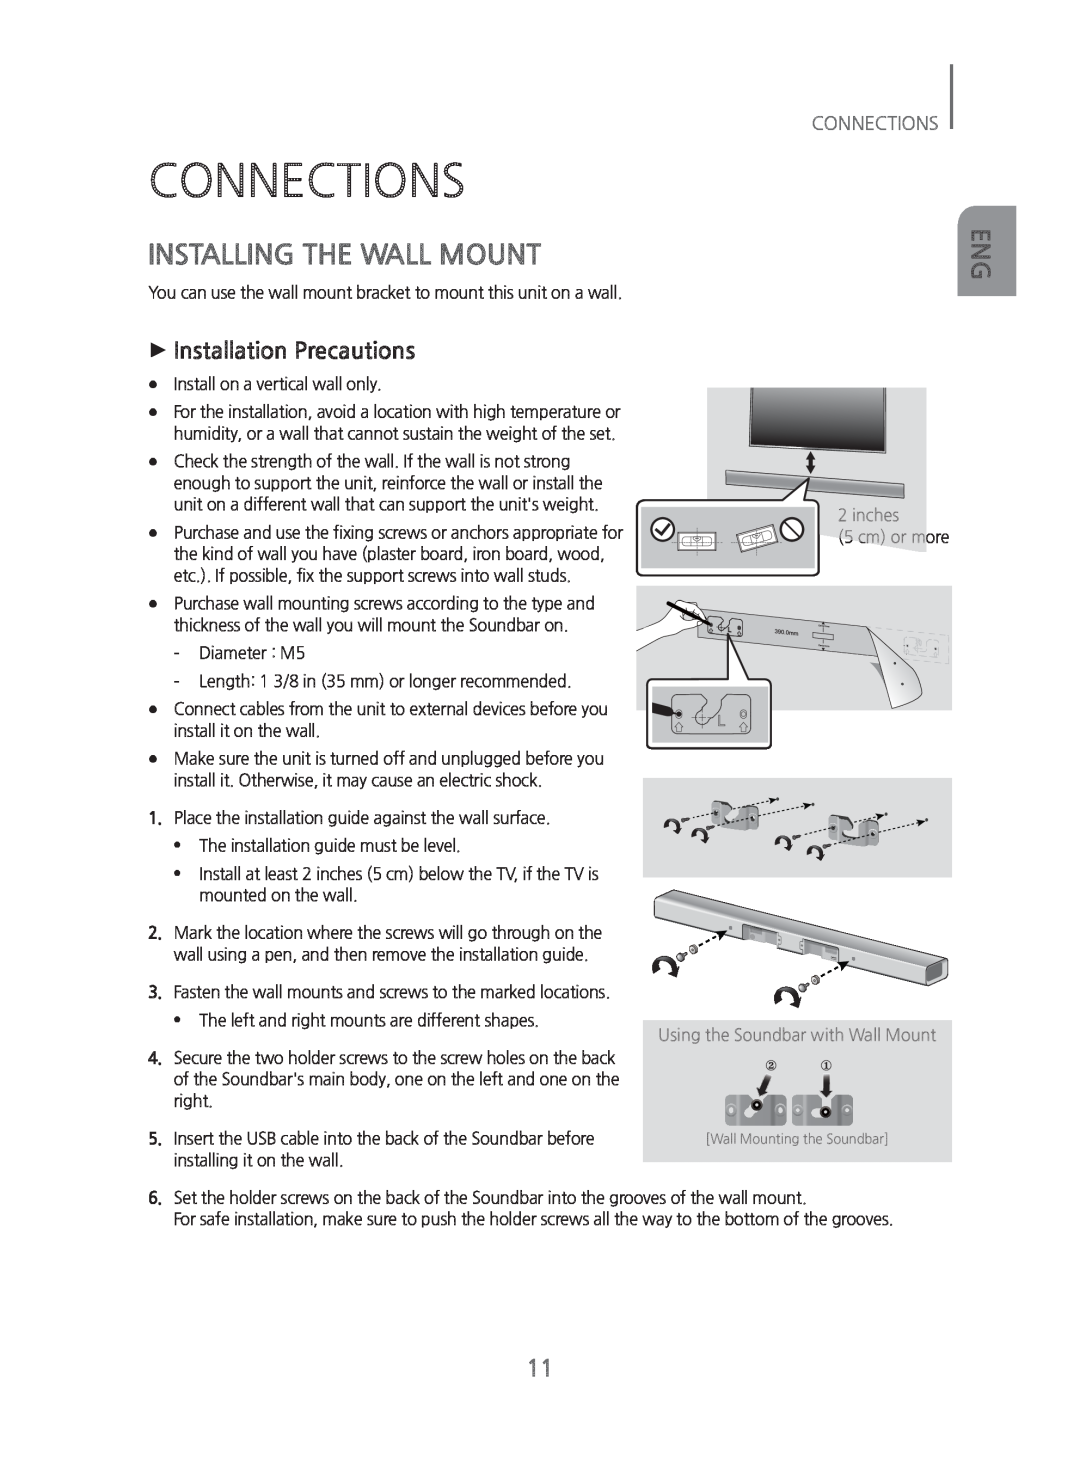 Samsung HW-H450/ZA manual Connections, Installing The Wall Mount, +Installation Precautions 